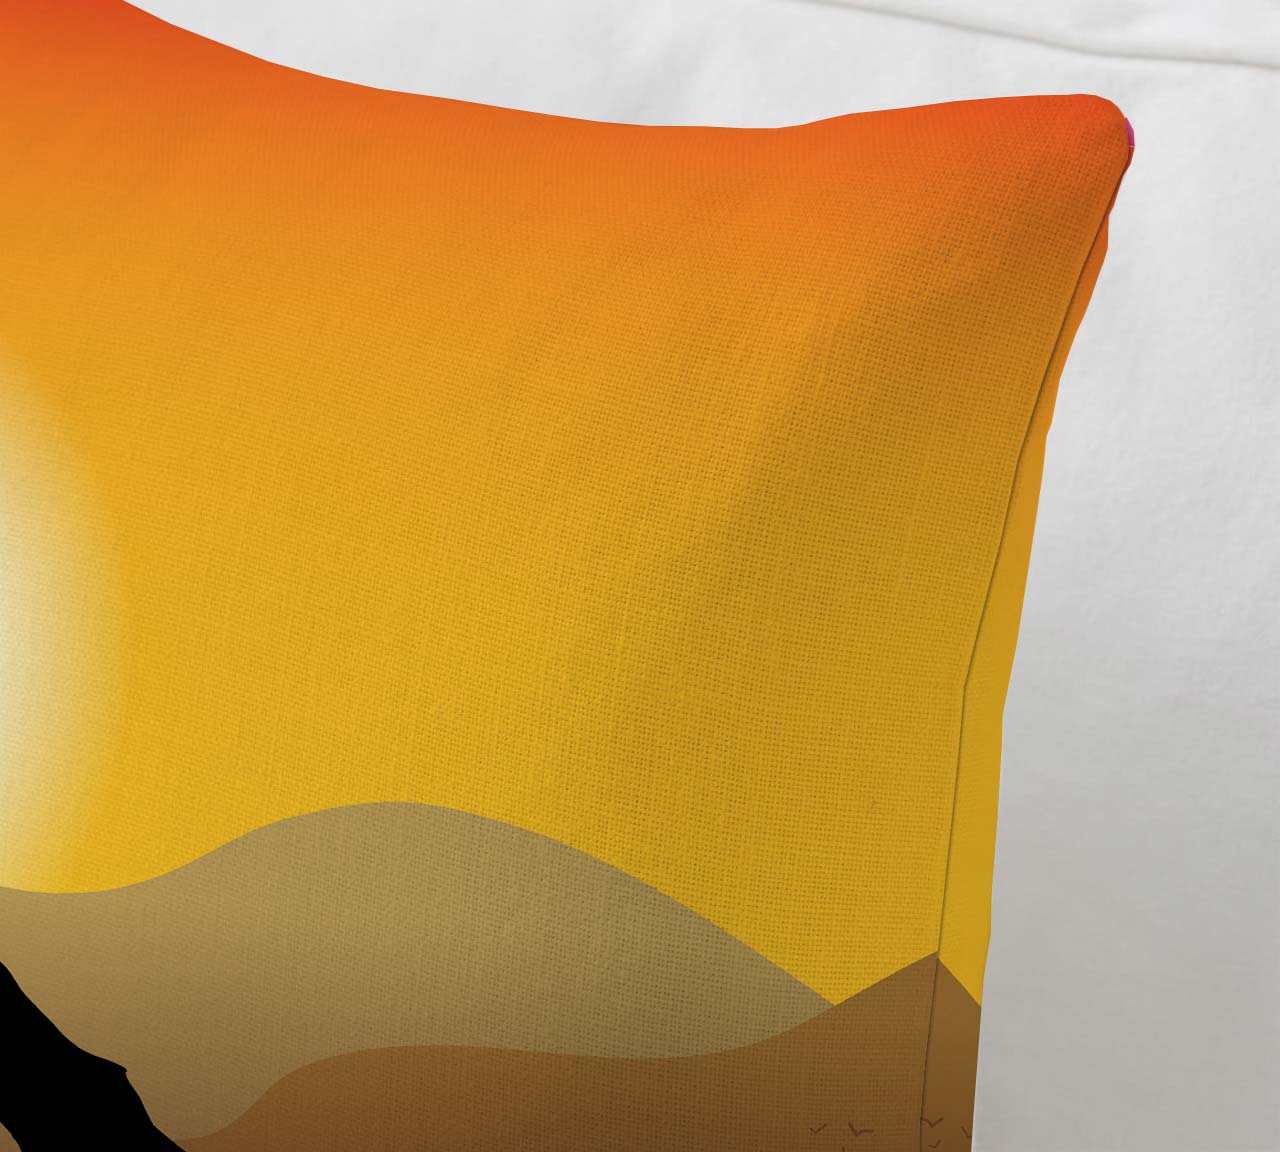 Embracing Sunset Cushion Cover Trendy Home